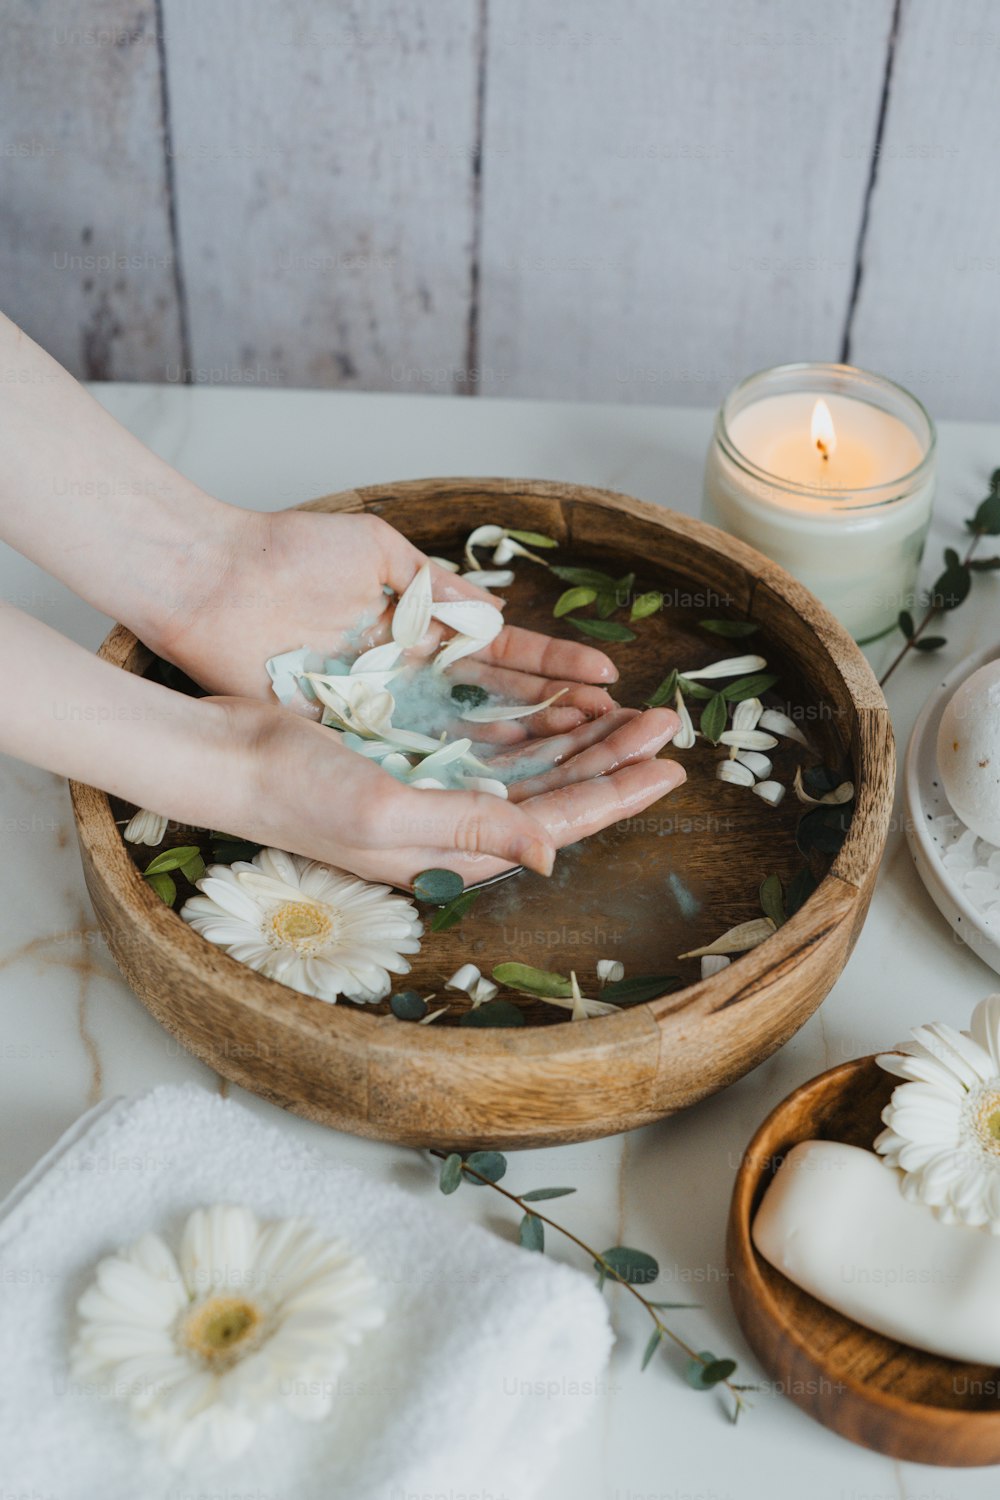 a person's hands on a wooden bowl with flowers and candles